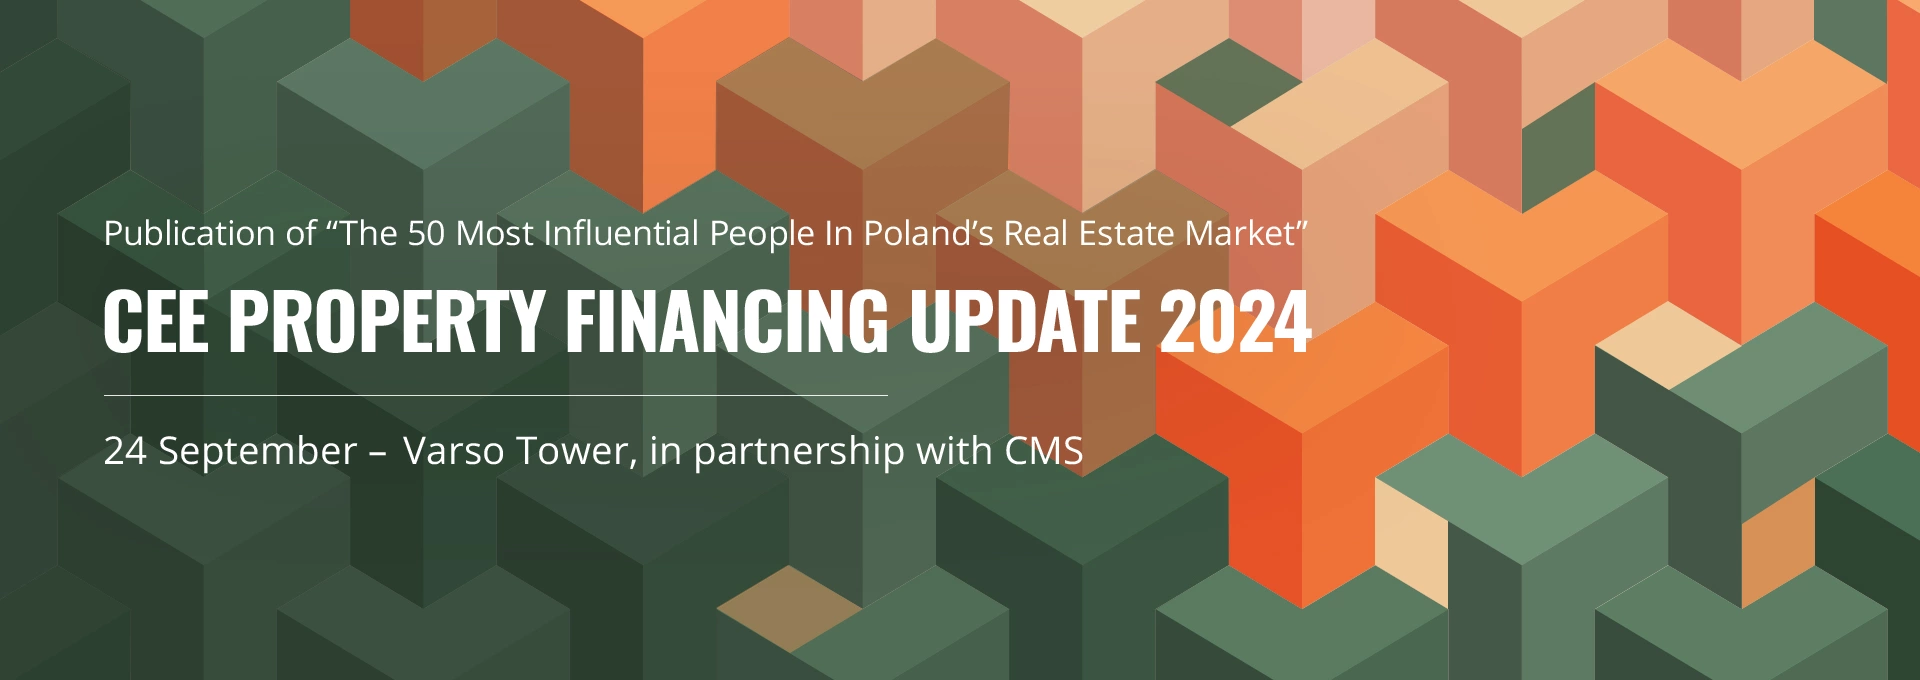 CEE Property Financing Update 2024 - Warsaw, Poland